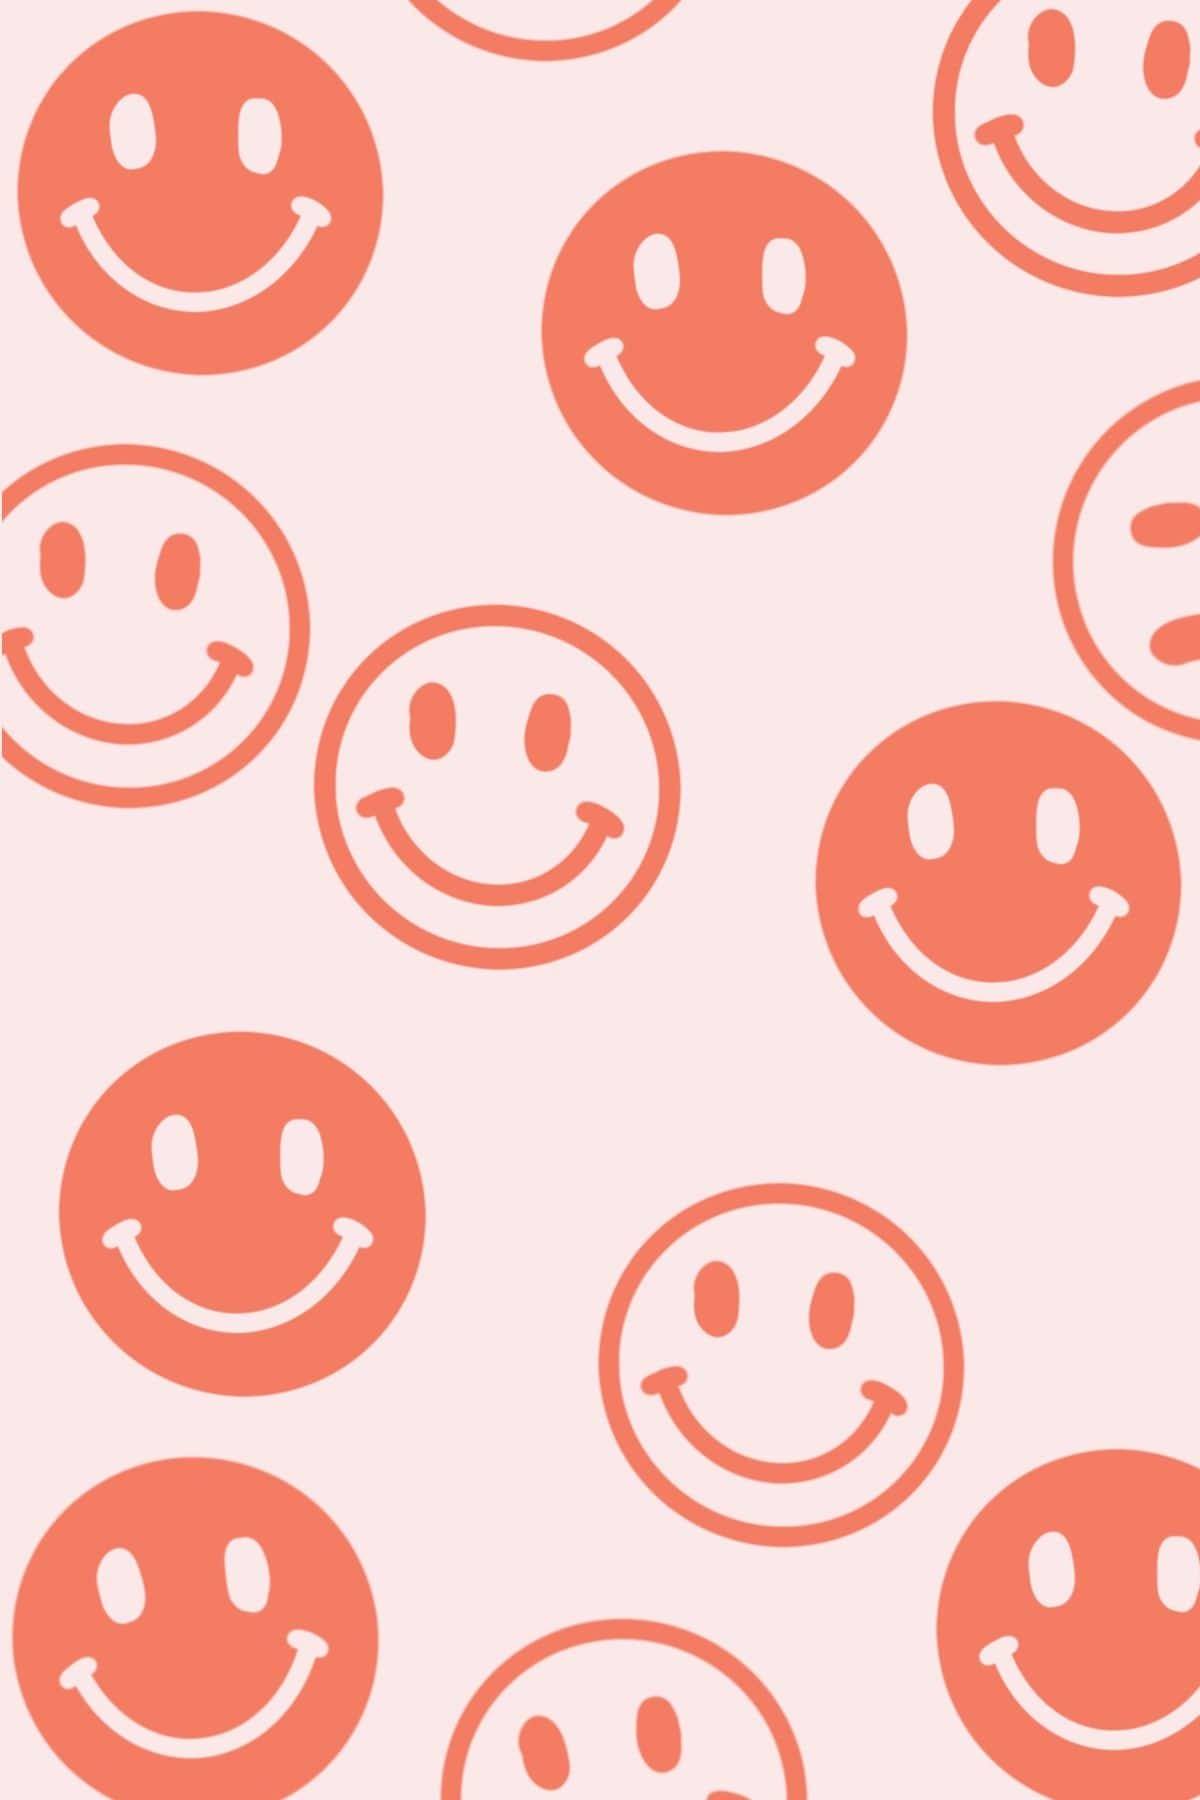 Smiley Wallpapers  Smiley Face Backgrounds HD